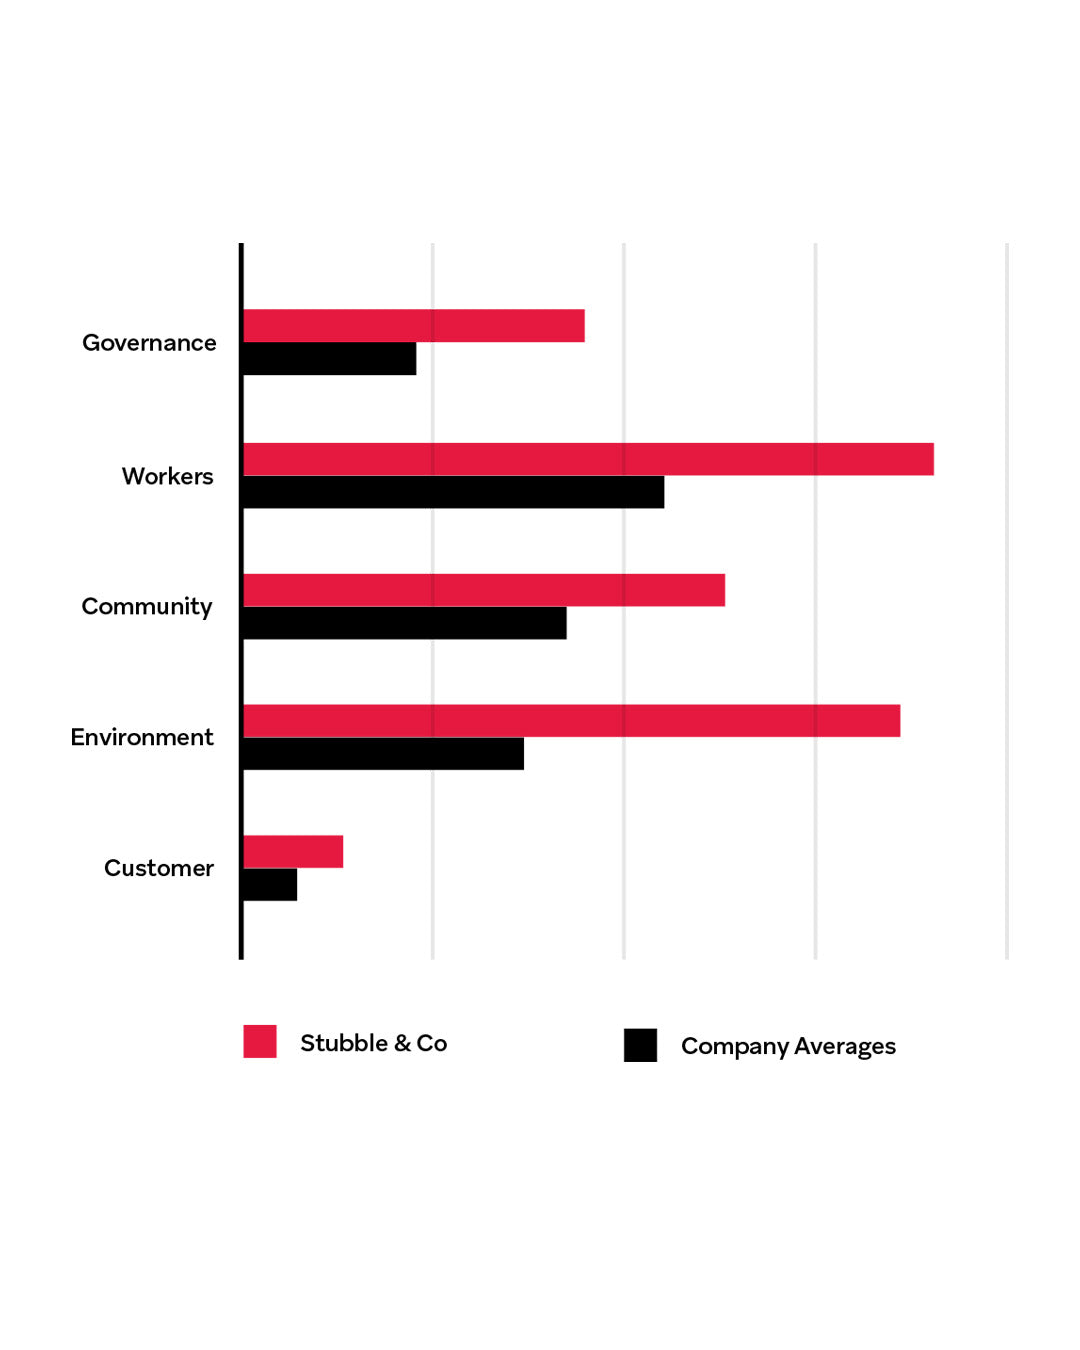 a bar graph comparing Stubble and Co's scores and general company averages across the 5 of b corp measurements